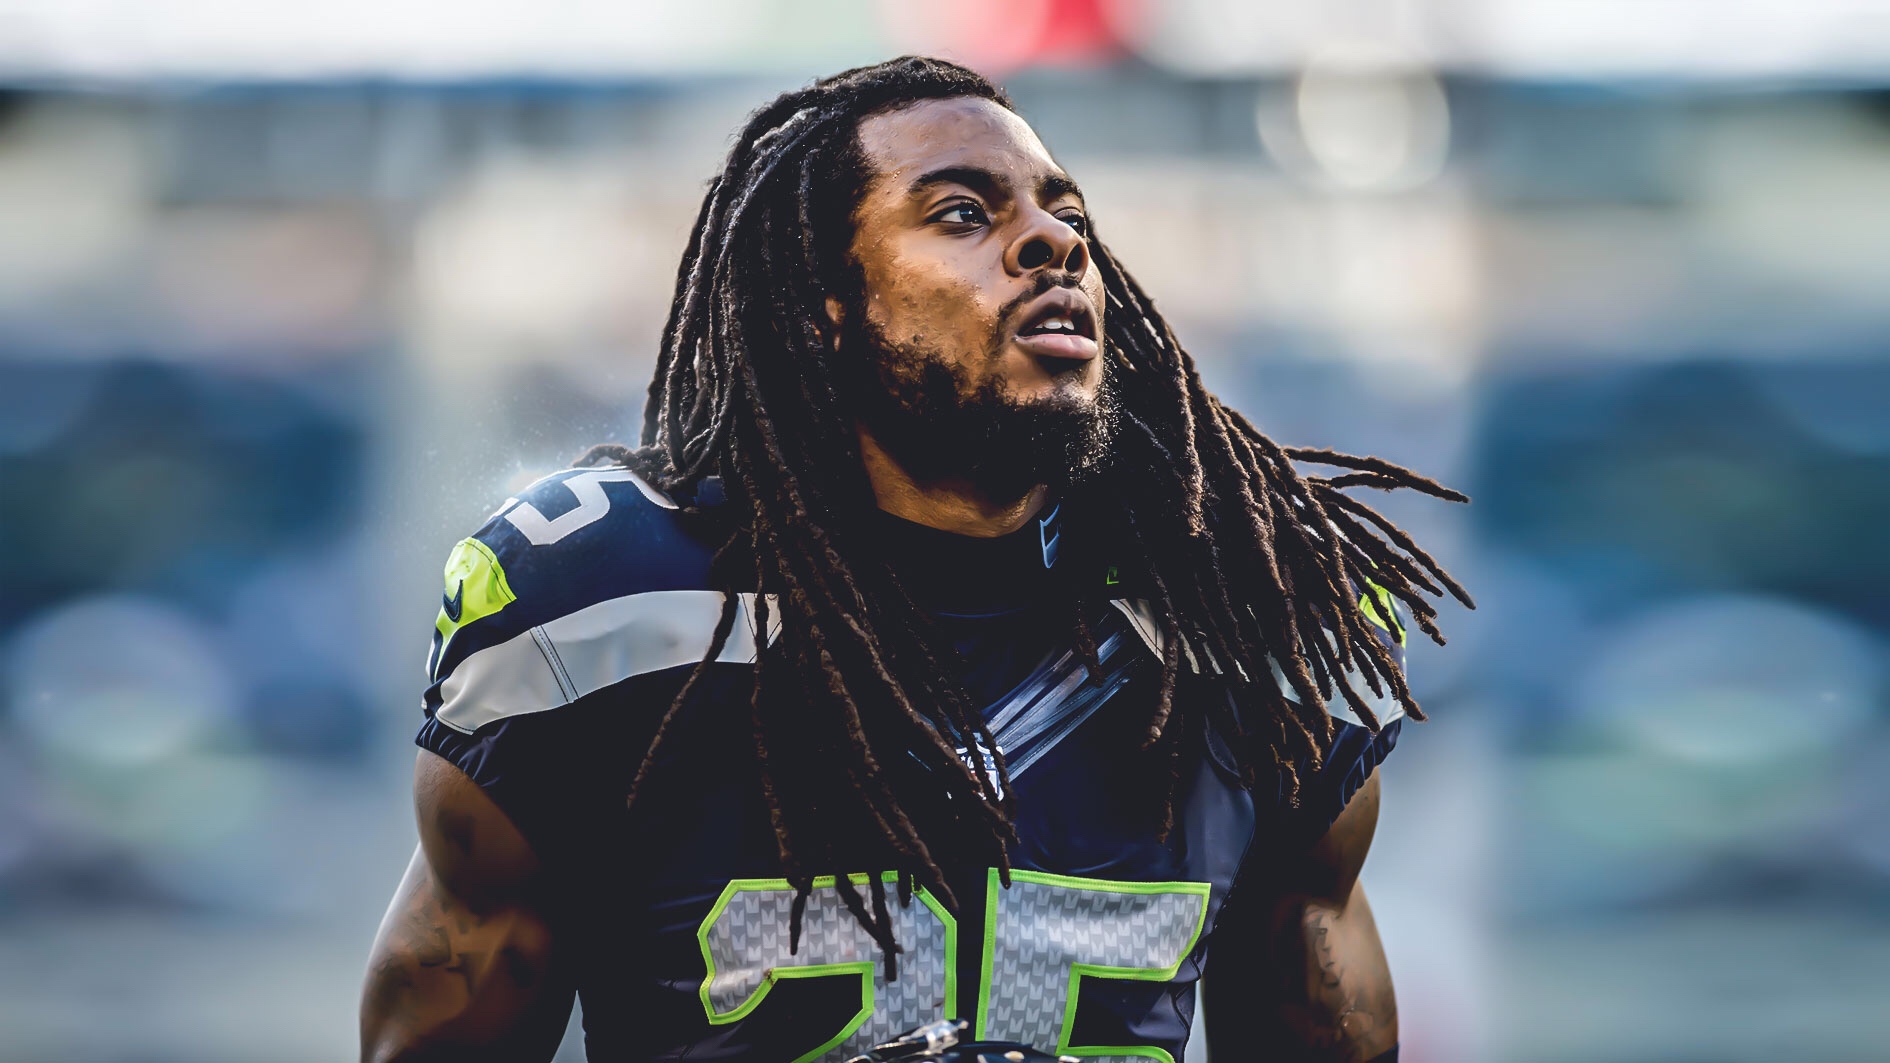 After being released by Seahawks, Richard Sherman signs with 49ers